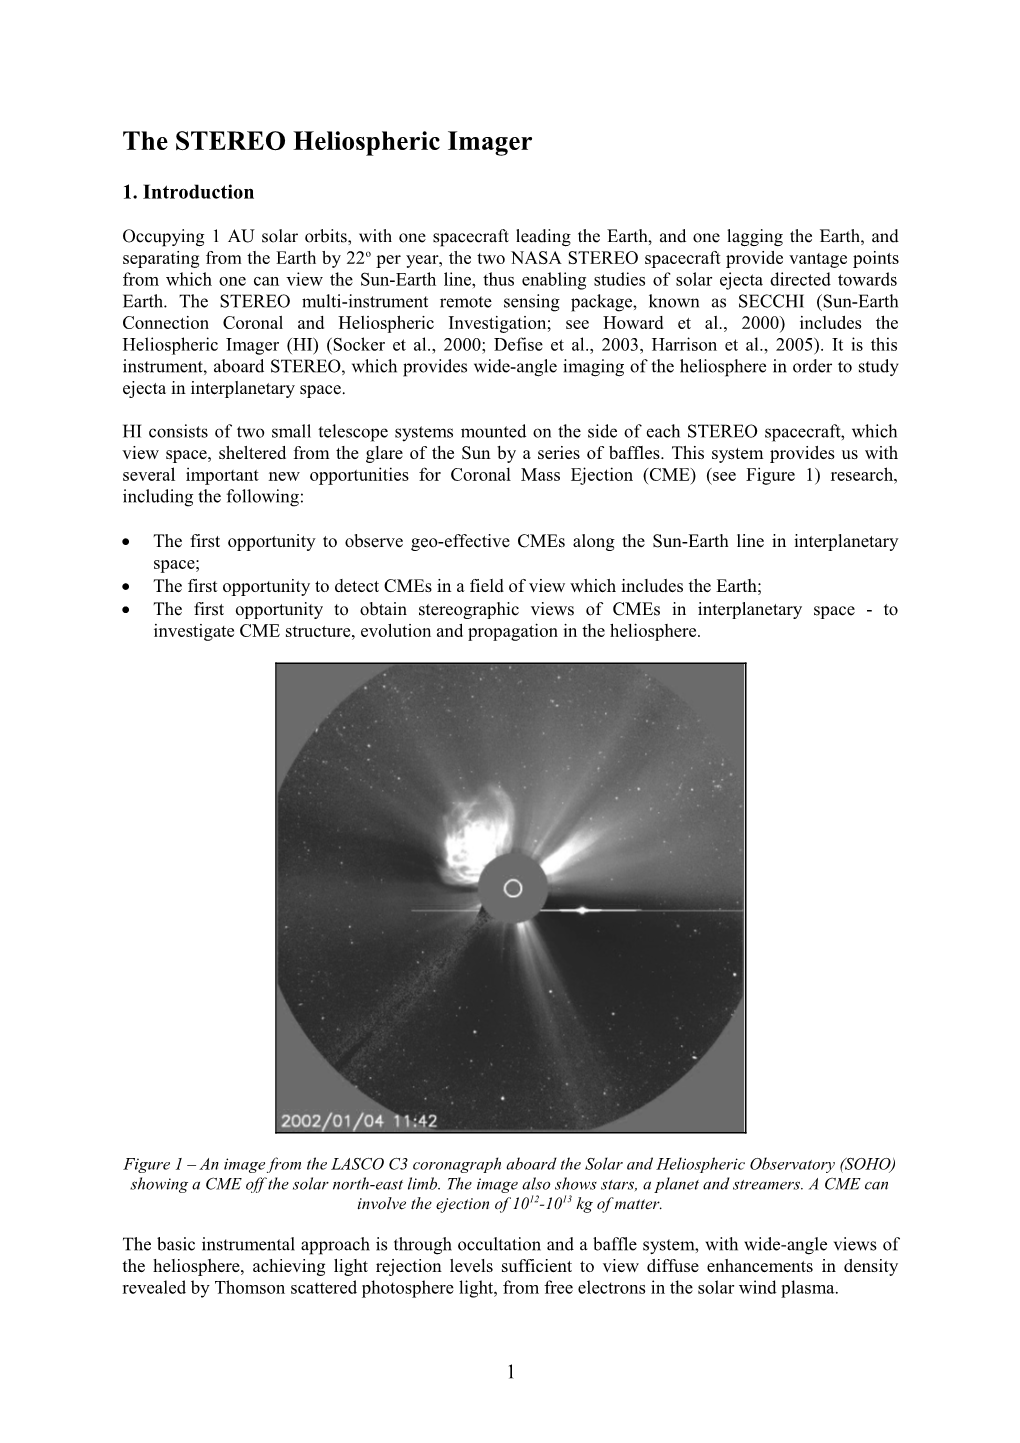 The STEREO Heliospheric Imager: How to Detect Cmes in the Heliosphere